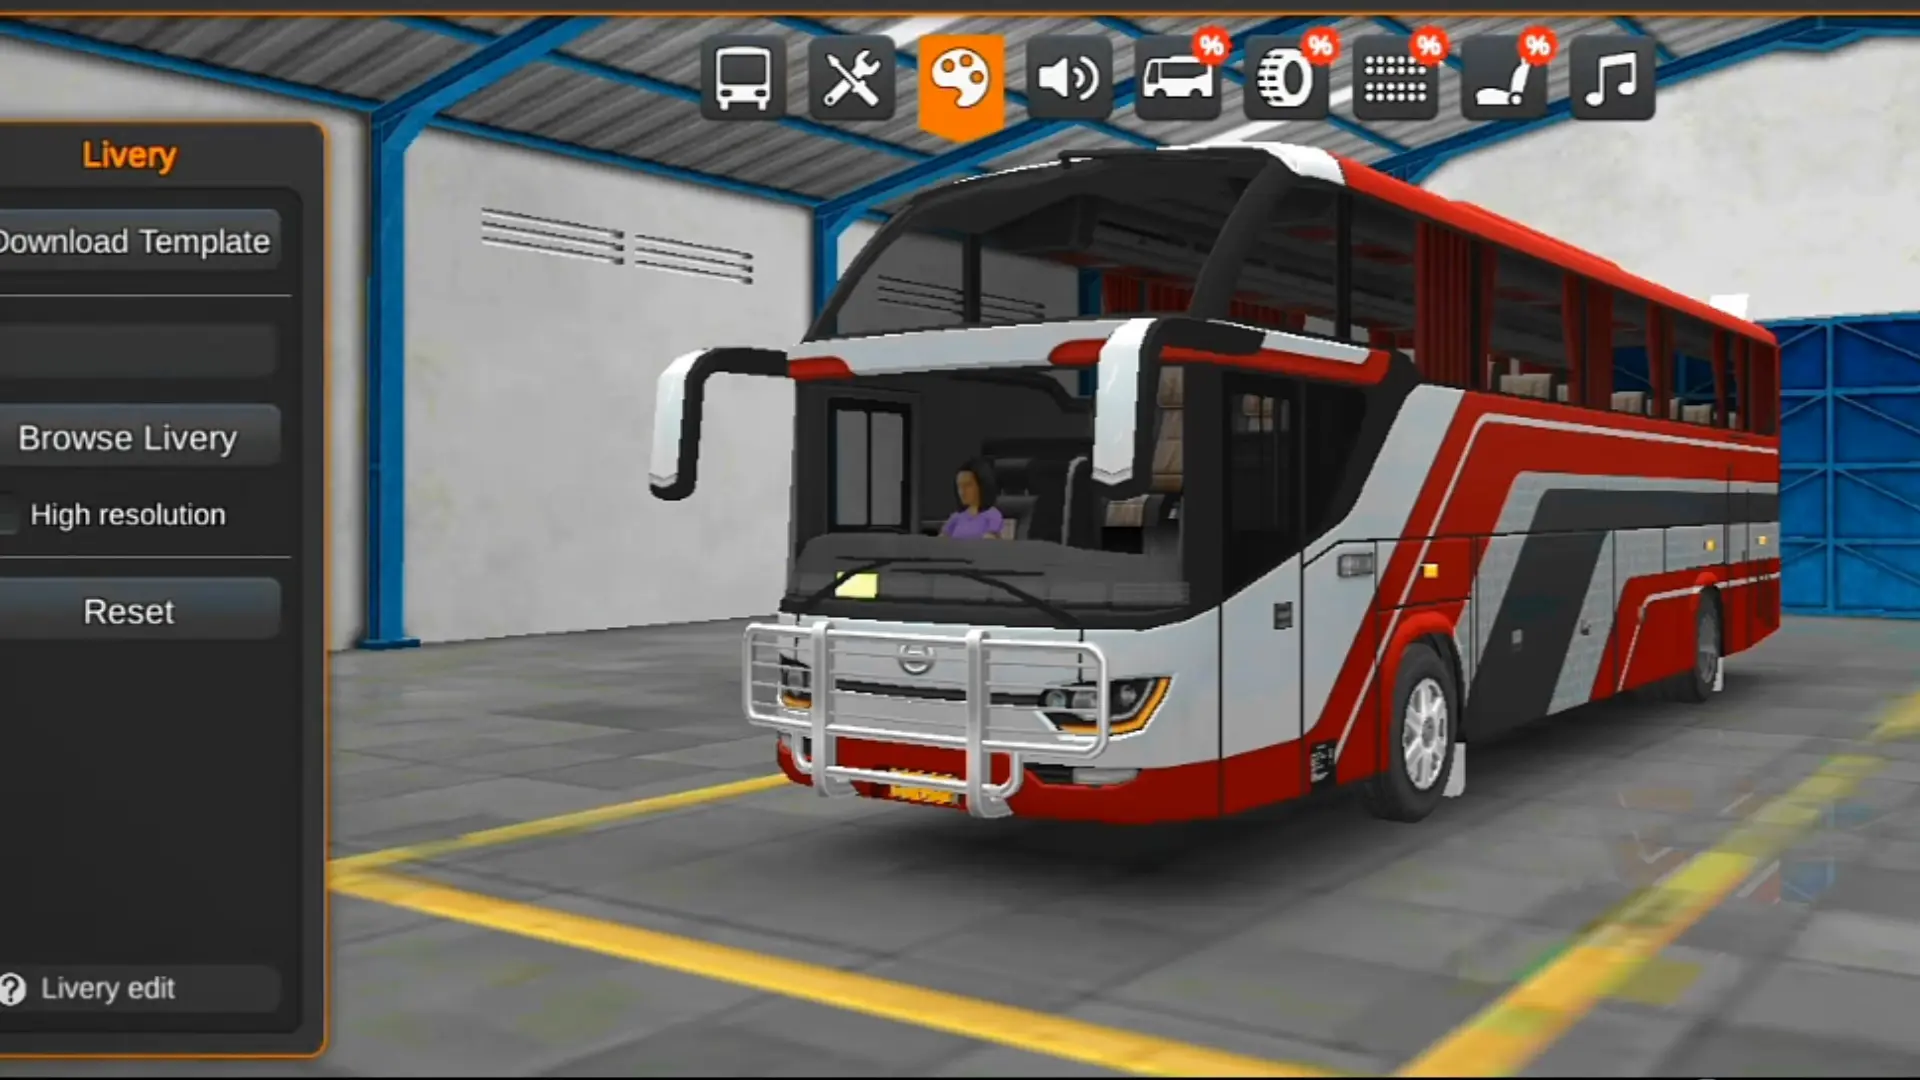 Screenshots from the Bus Simulator Indonesia mod apk show the livery customizations interface